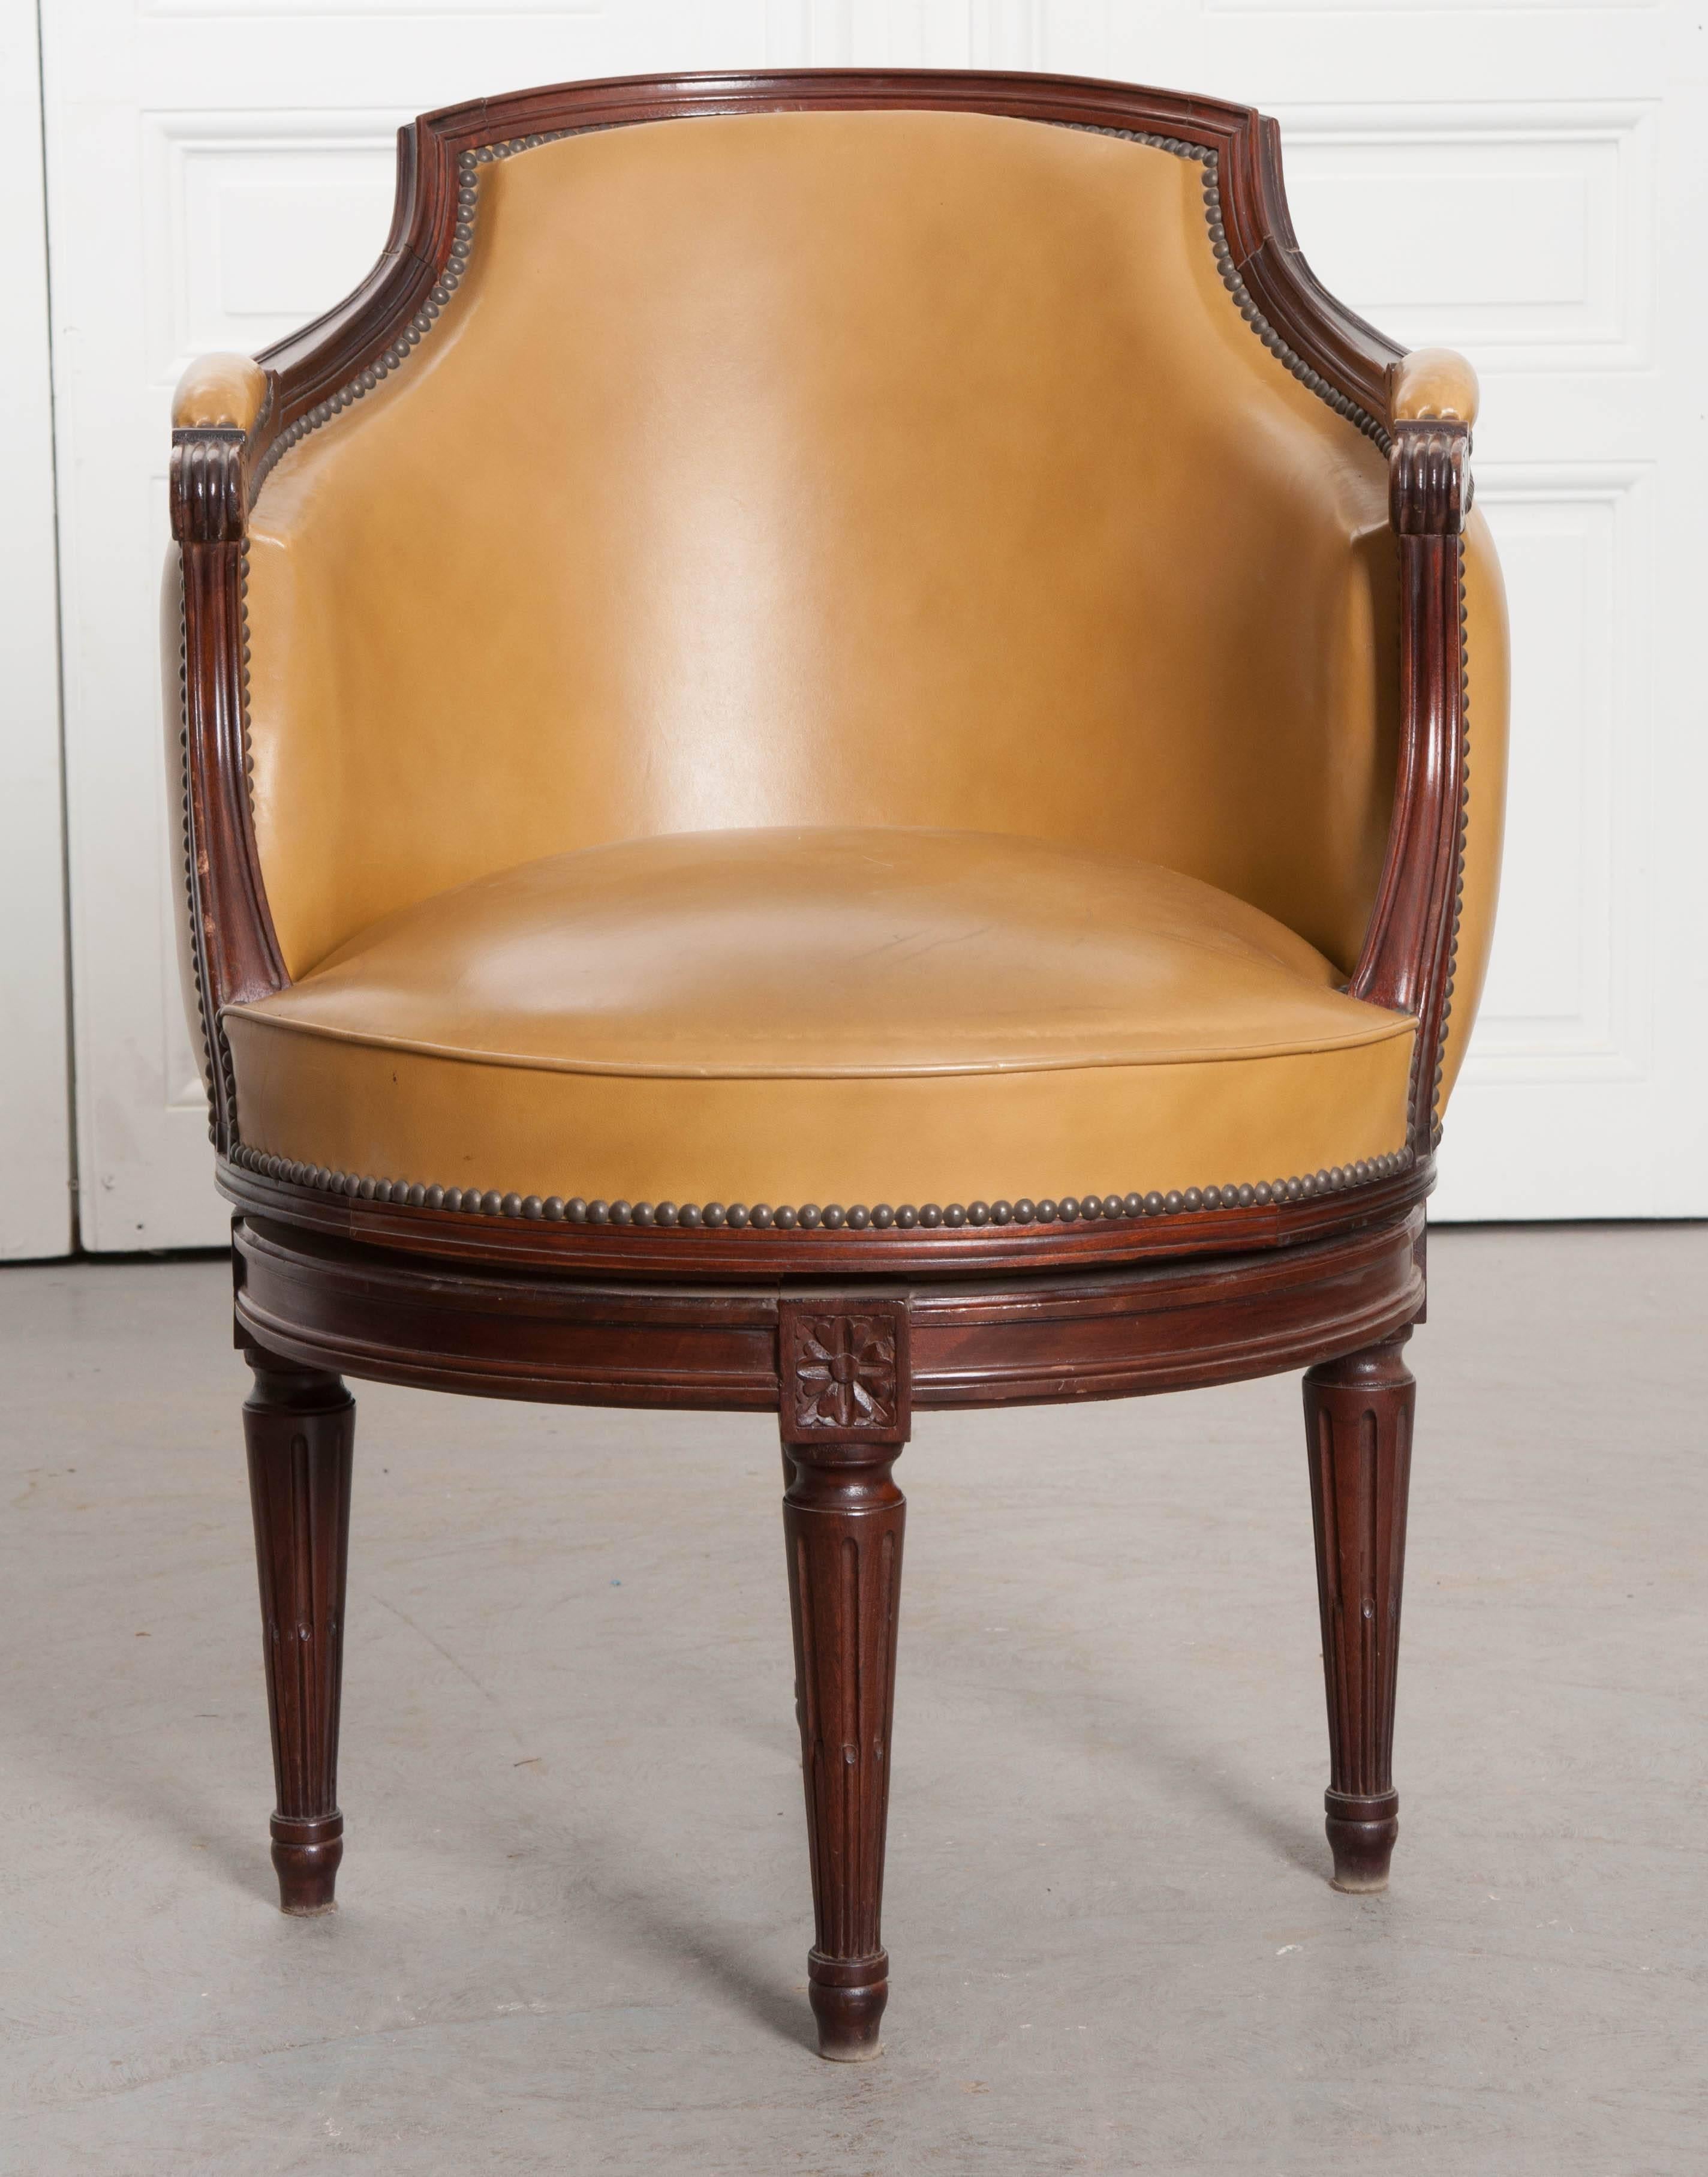 An individual mahogany swivel chair, done in the Louis XVI style in France, circa 1910. The chair has a round base, to which the chair is mounted, allowing it to rotate in a 360-degree circular motion. The chair has a barrel back and is upholstered